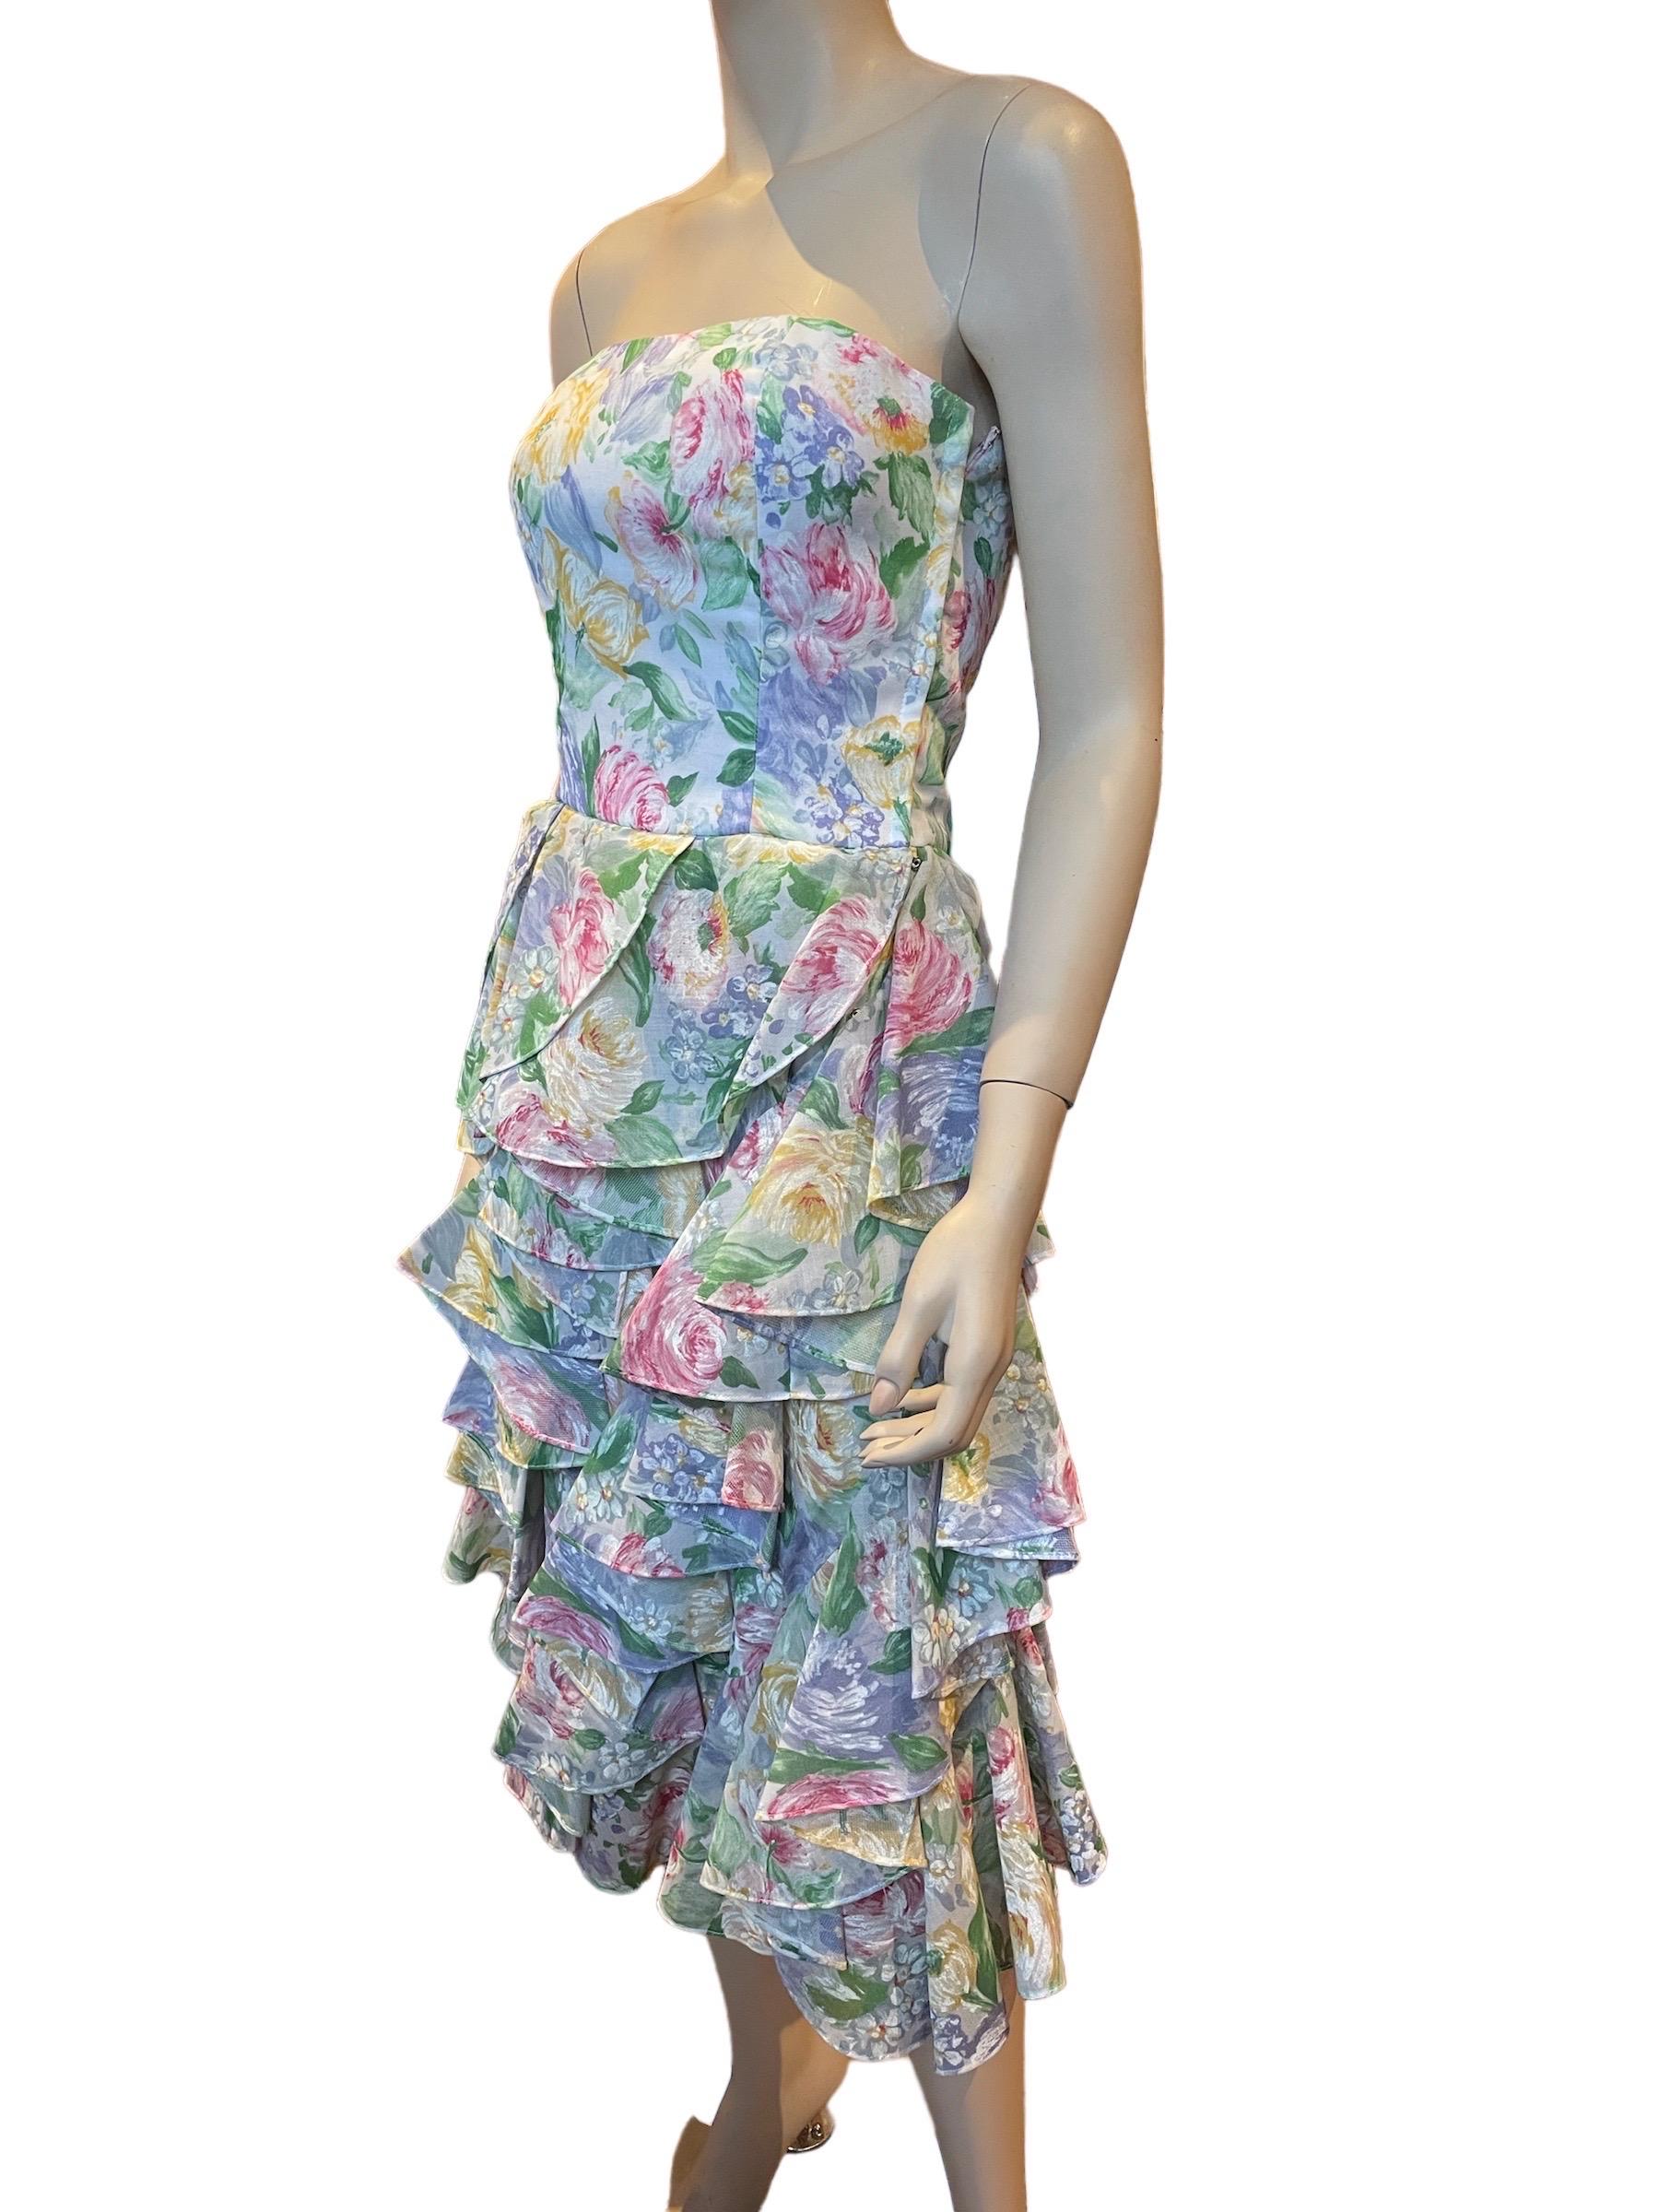 1980s Victor Costa Watercolor Floral Strapless Dress with Ruffled Skirt 

A beautiful floral dress with a structured bodice with boning and stuff tulle lined ruffles. 